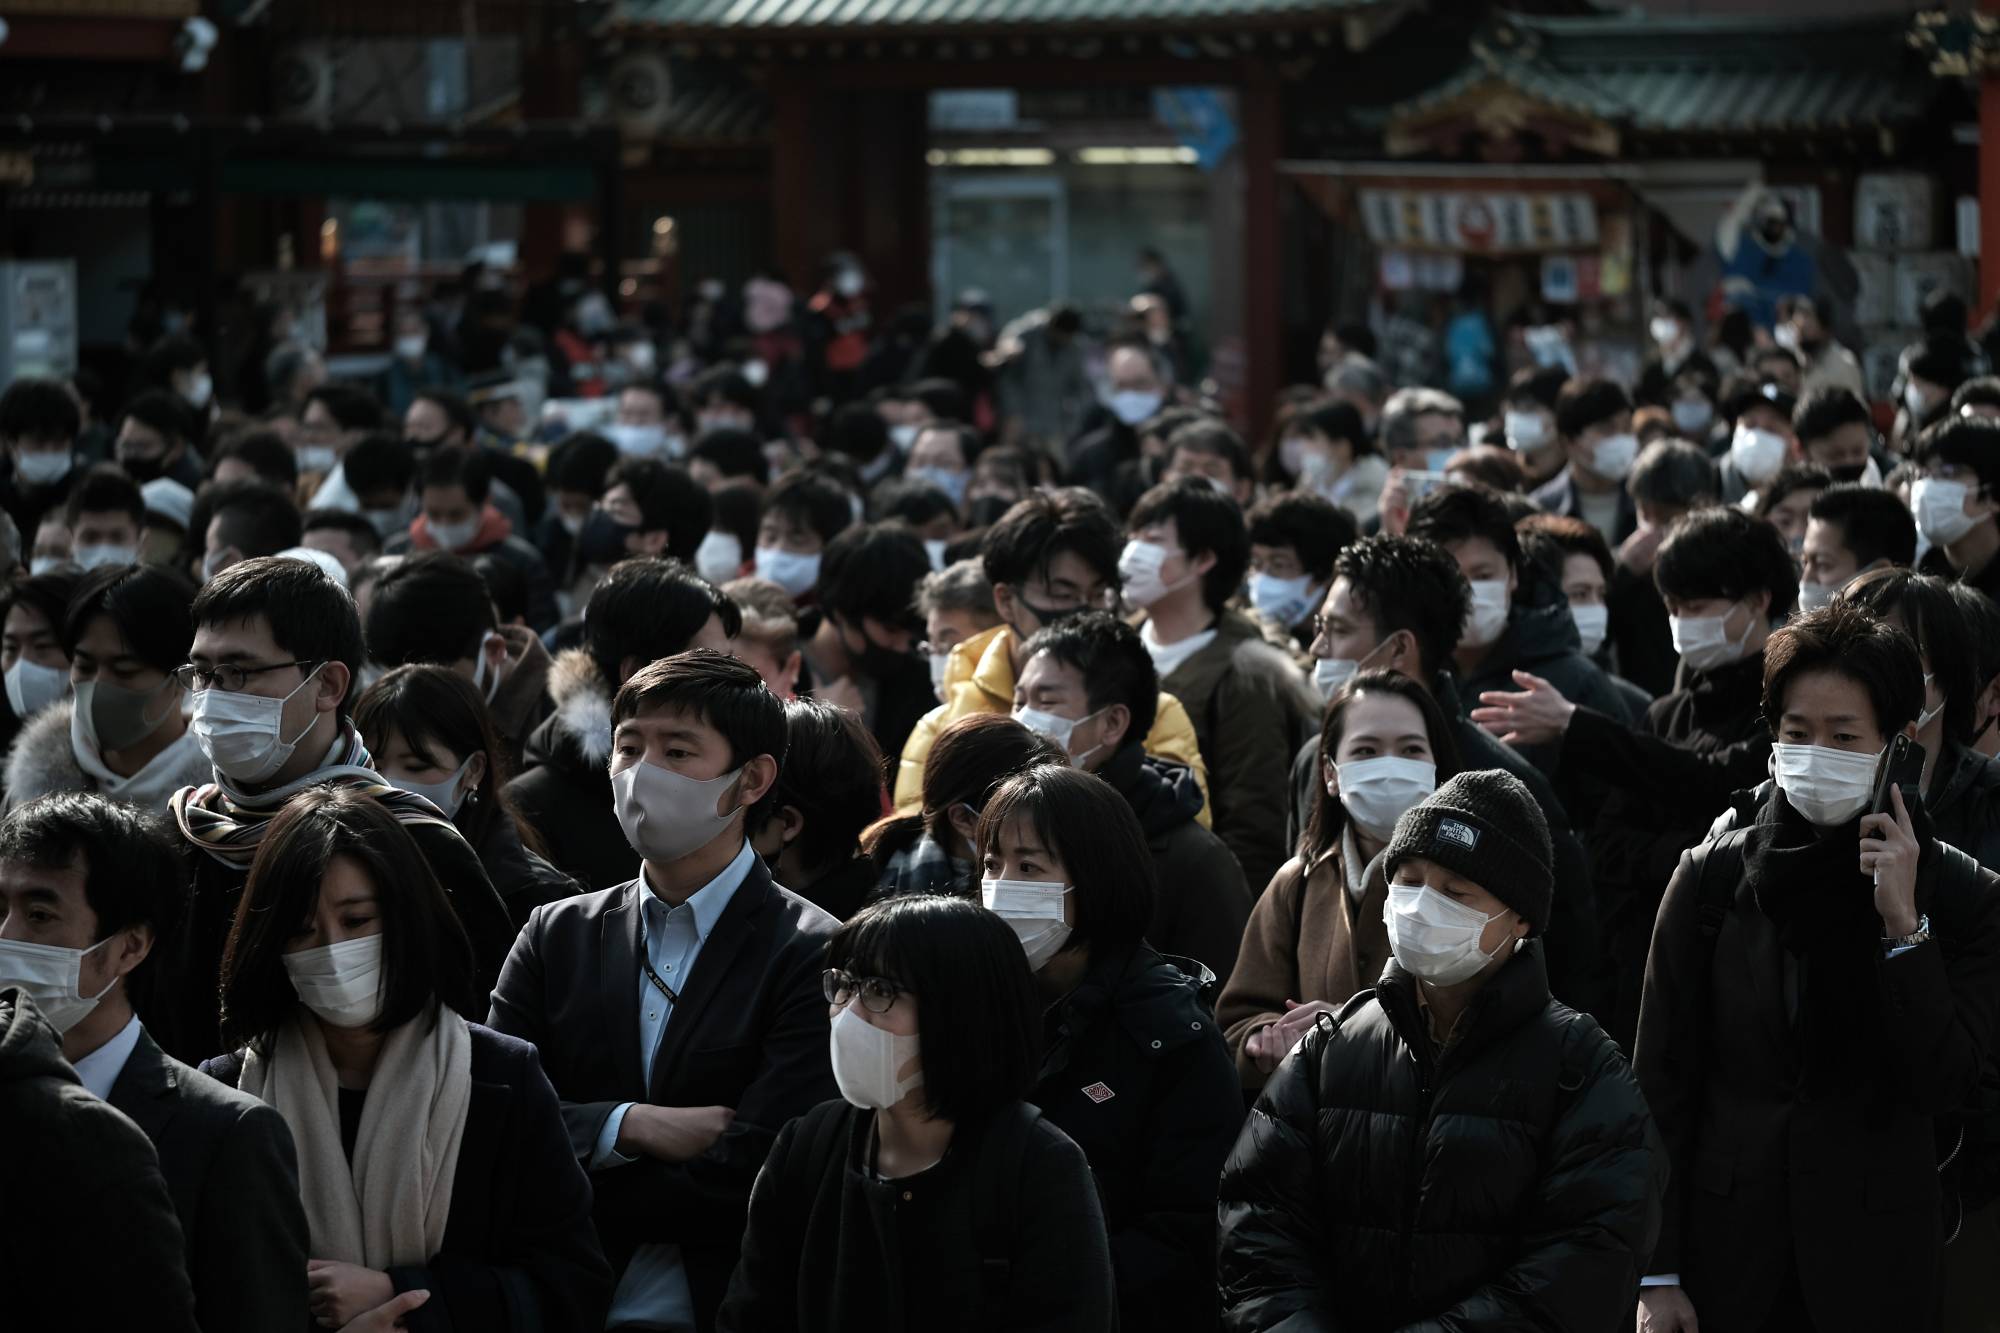 People wearing protective face masks as they line up to offer prayers on the first business day of the year at the Kanda Myojin shrine in Tokyo on Monday. | BLOOMBERG